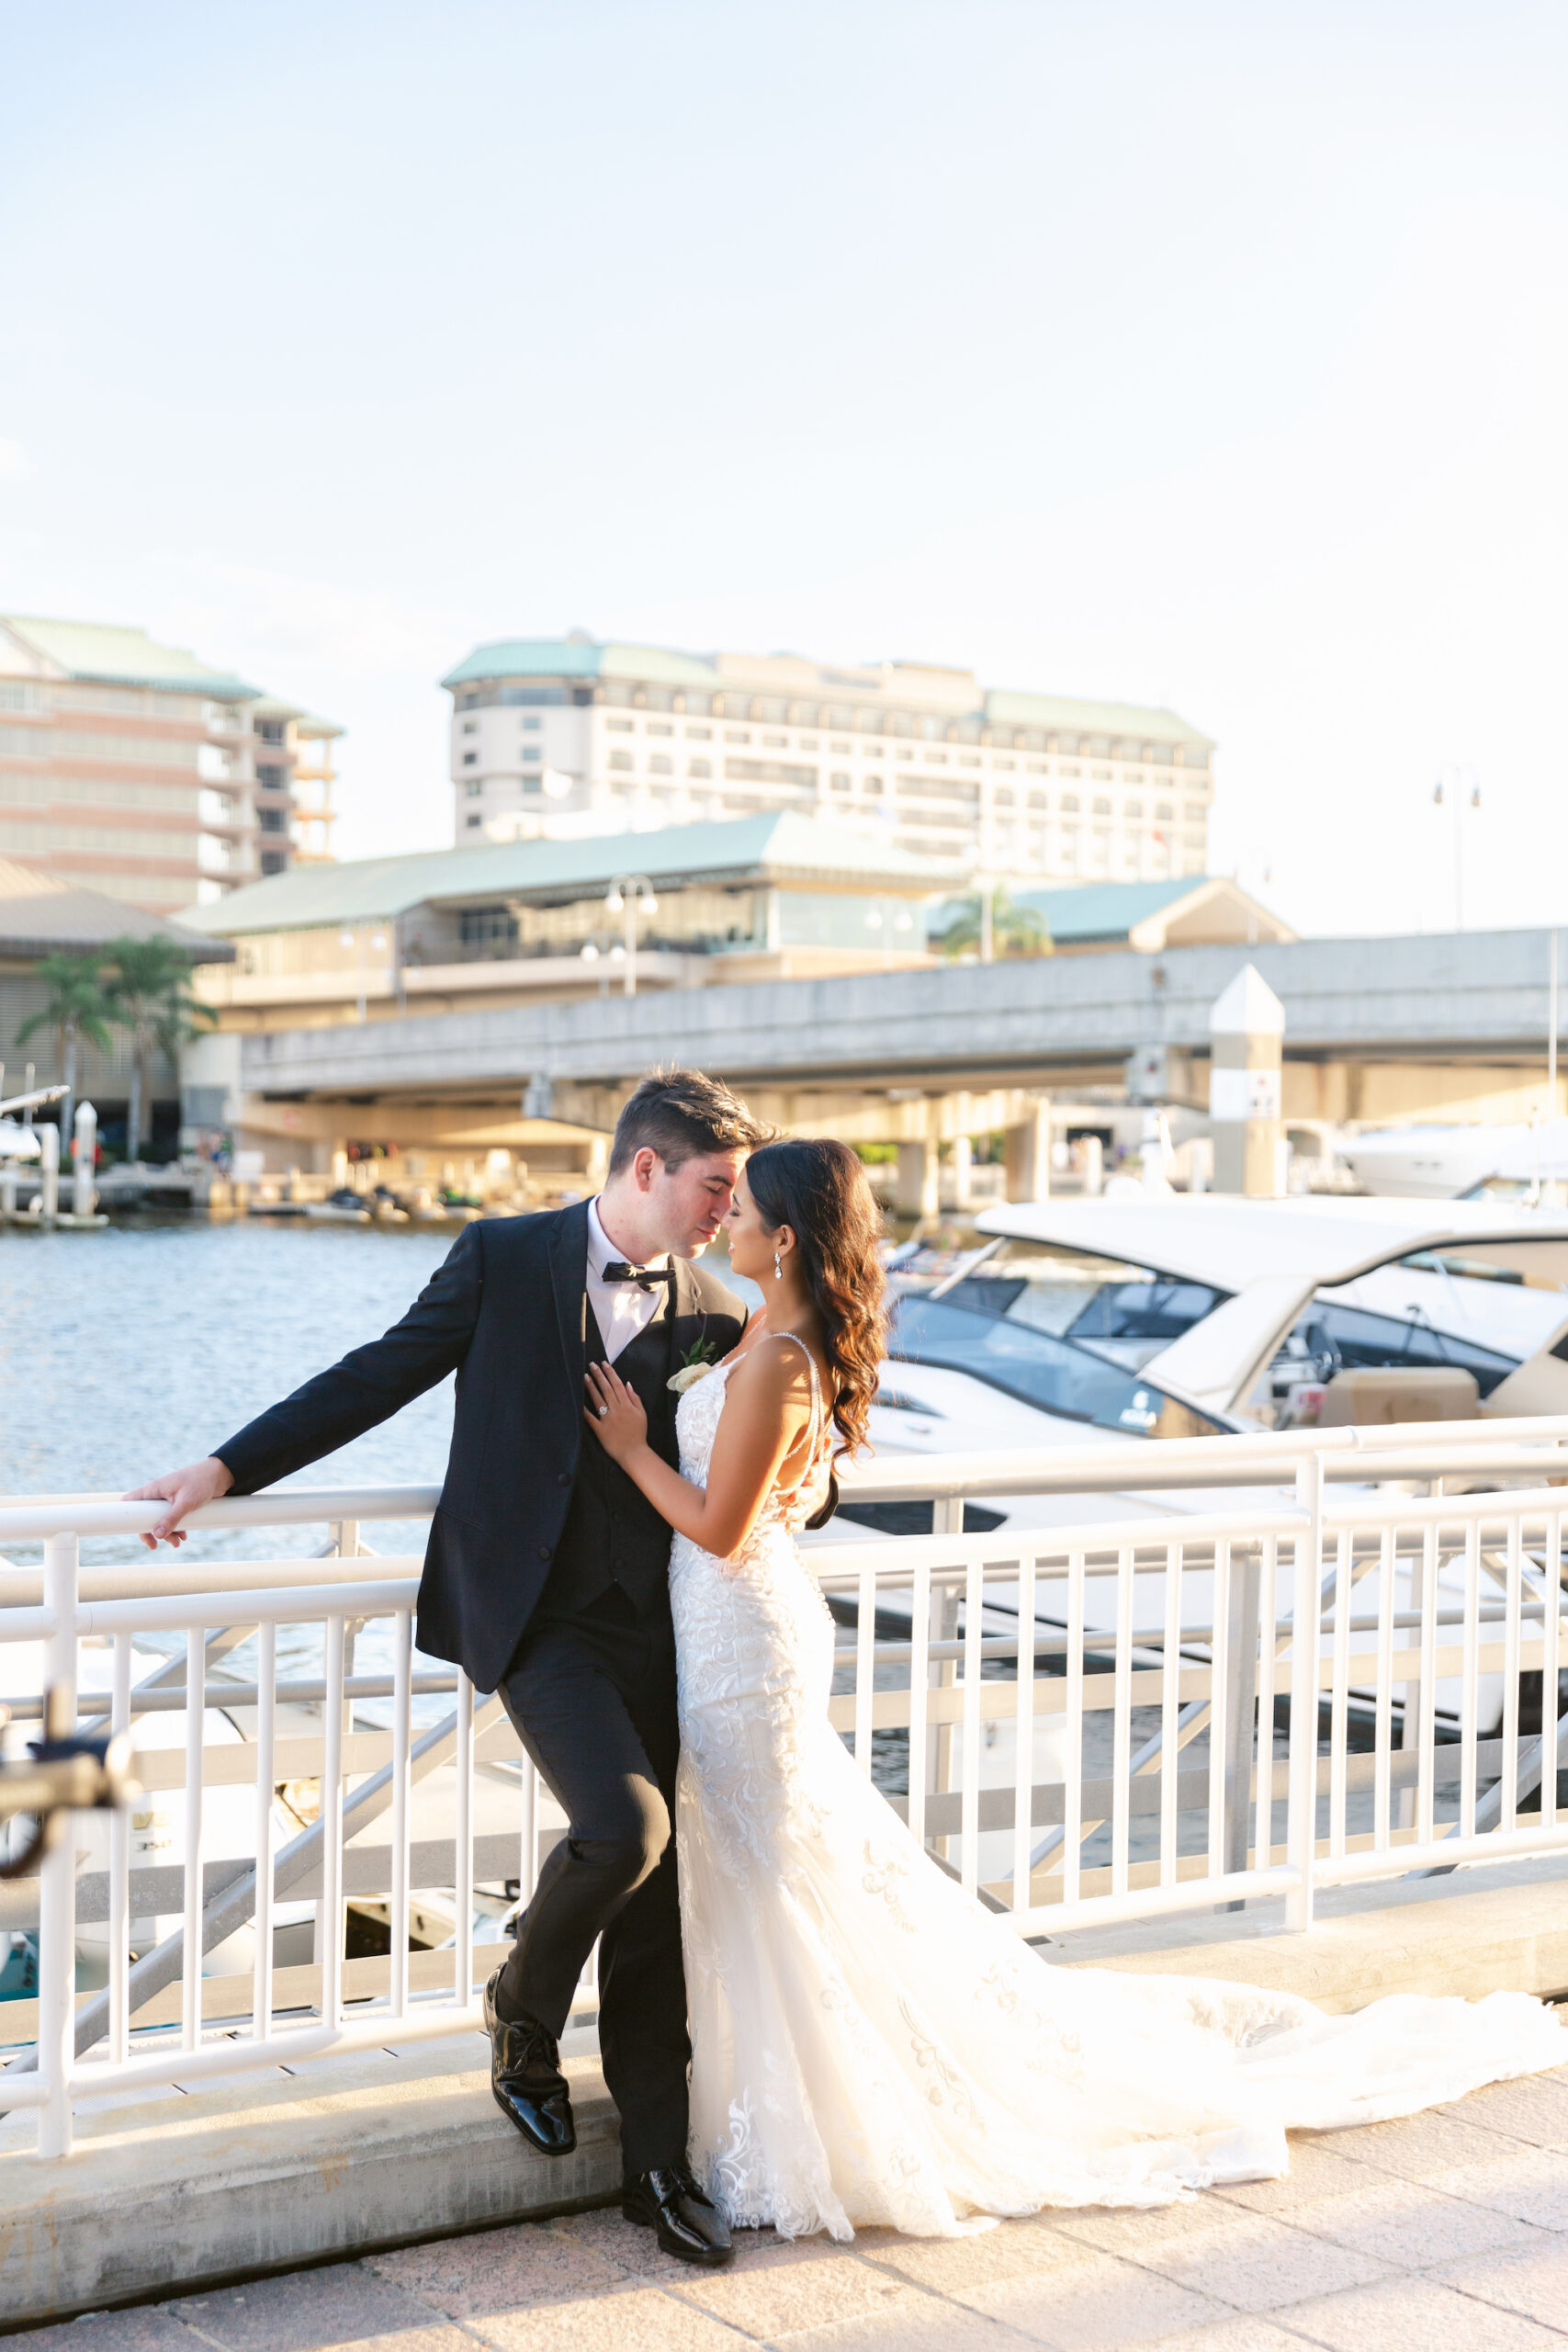 Classic Bride and Groom Waterfront Downtown Tampa | Tampa Bay Wedding Hair and Makeup Artists Adore Bridal